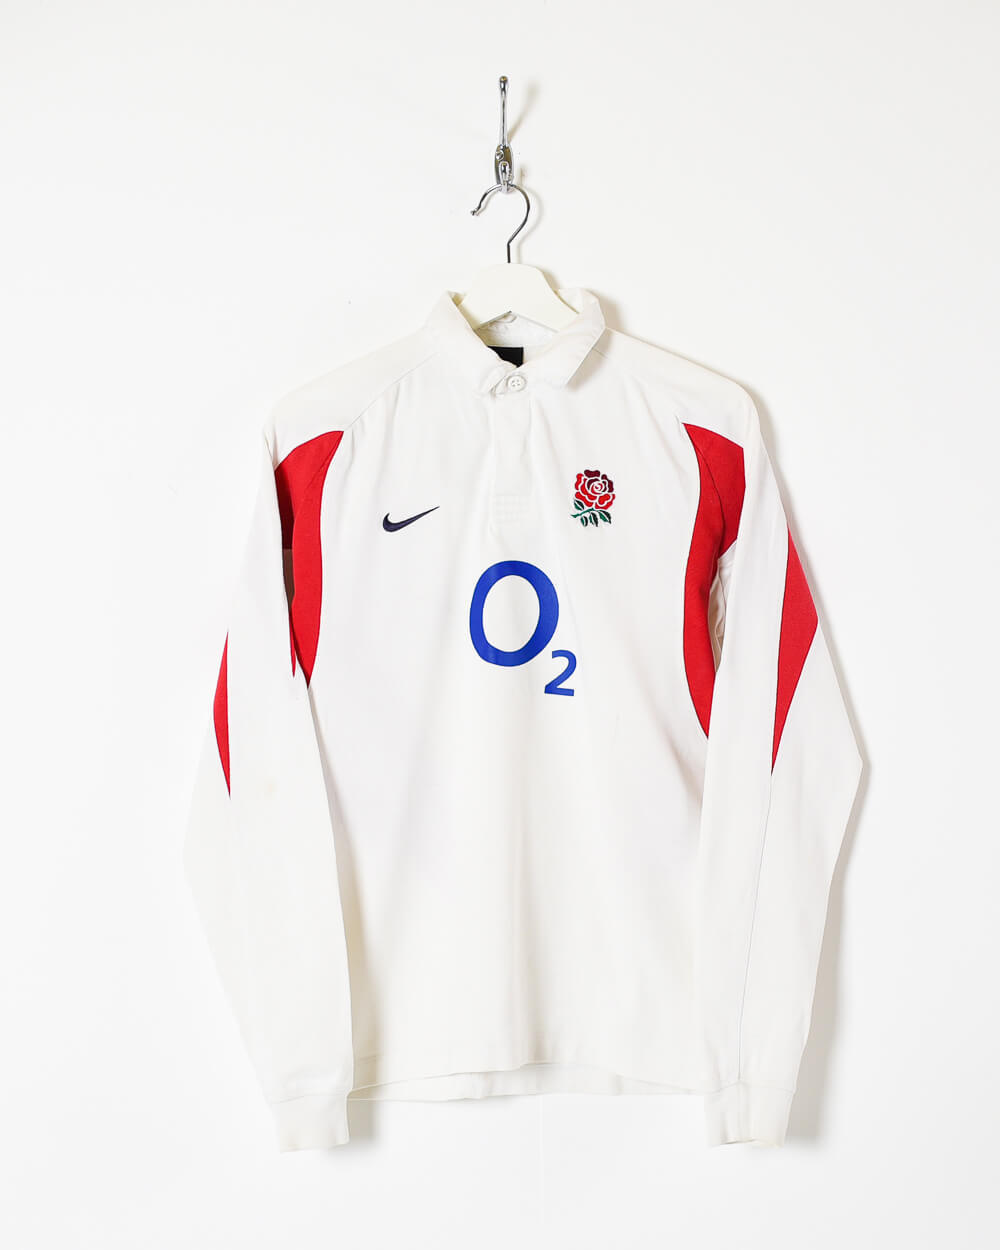 White Nike England Rugby Shirt - Small